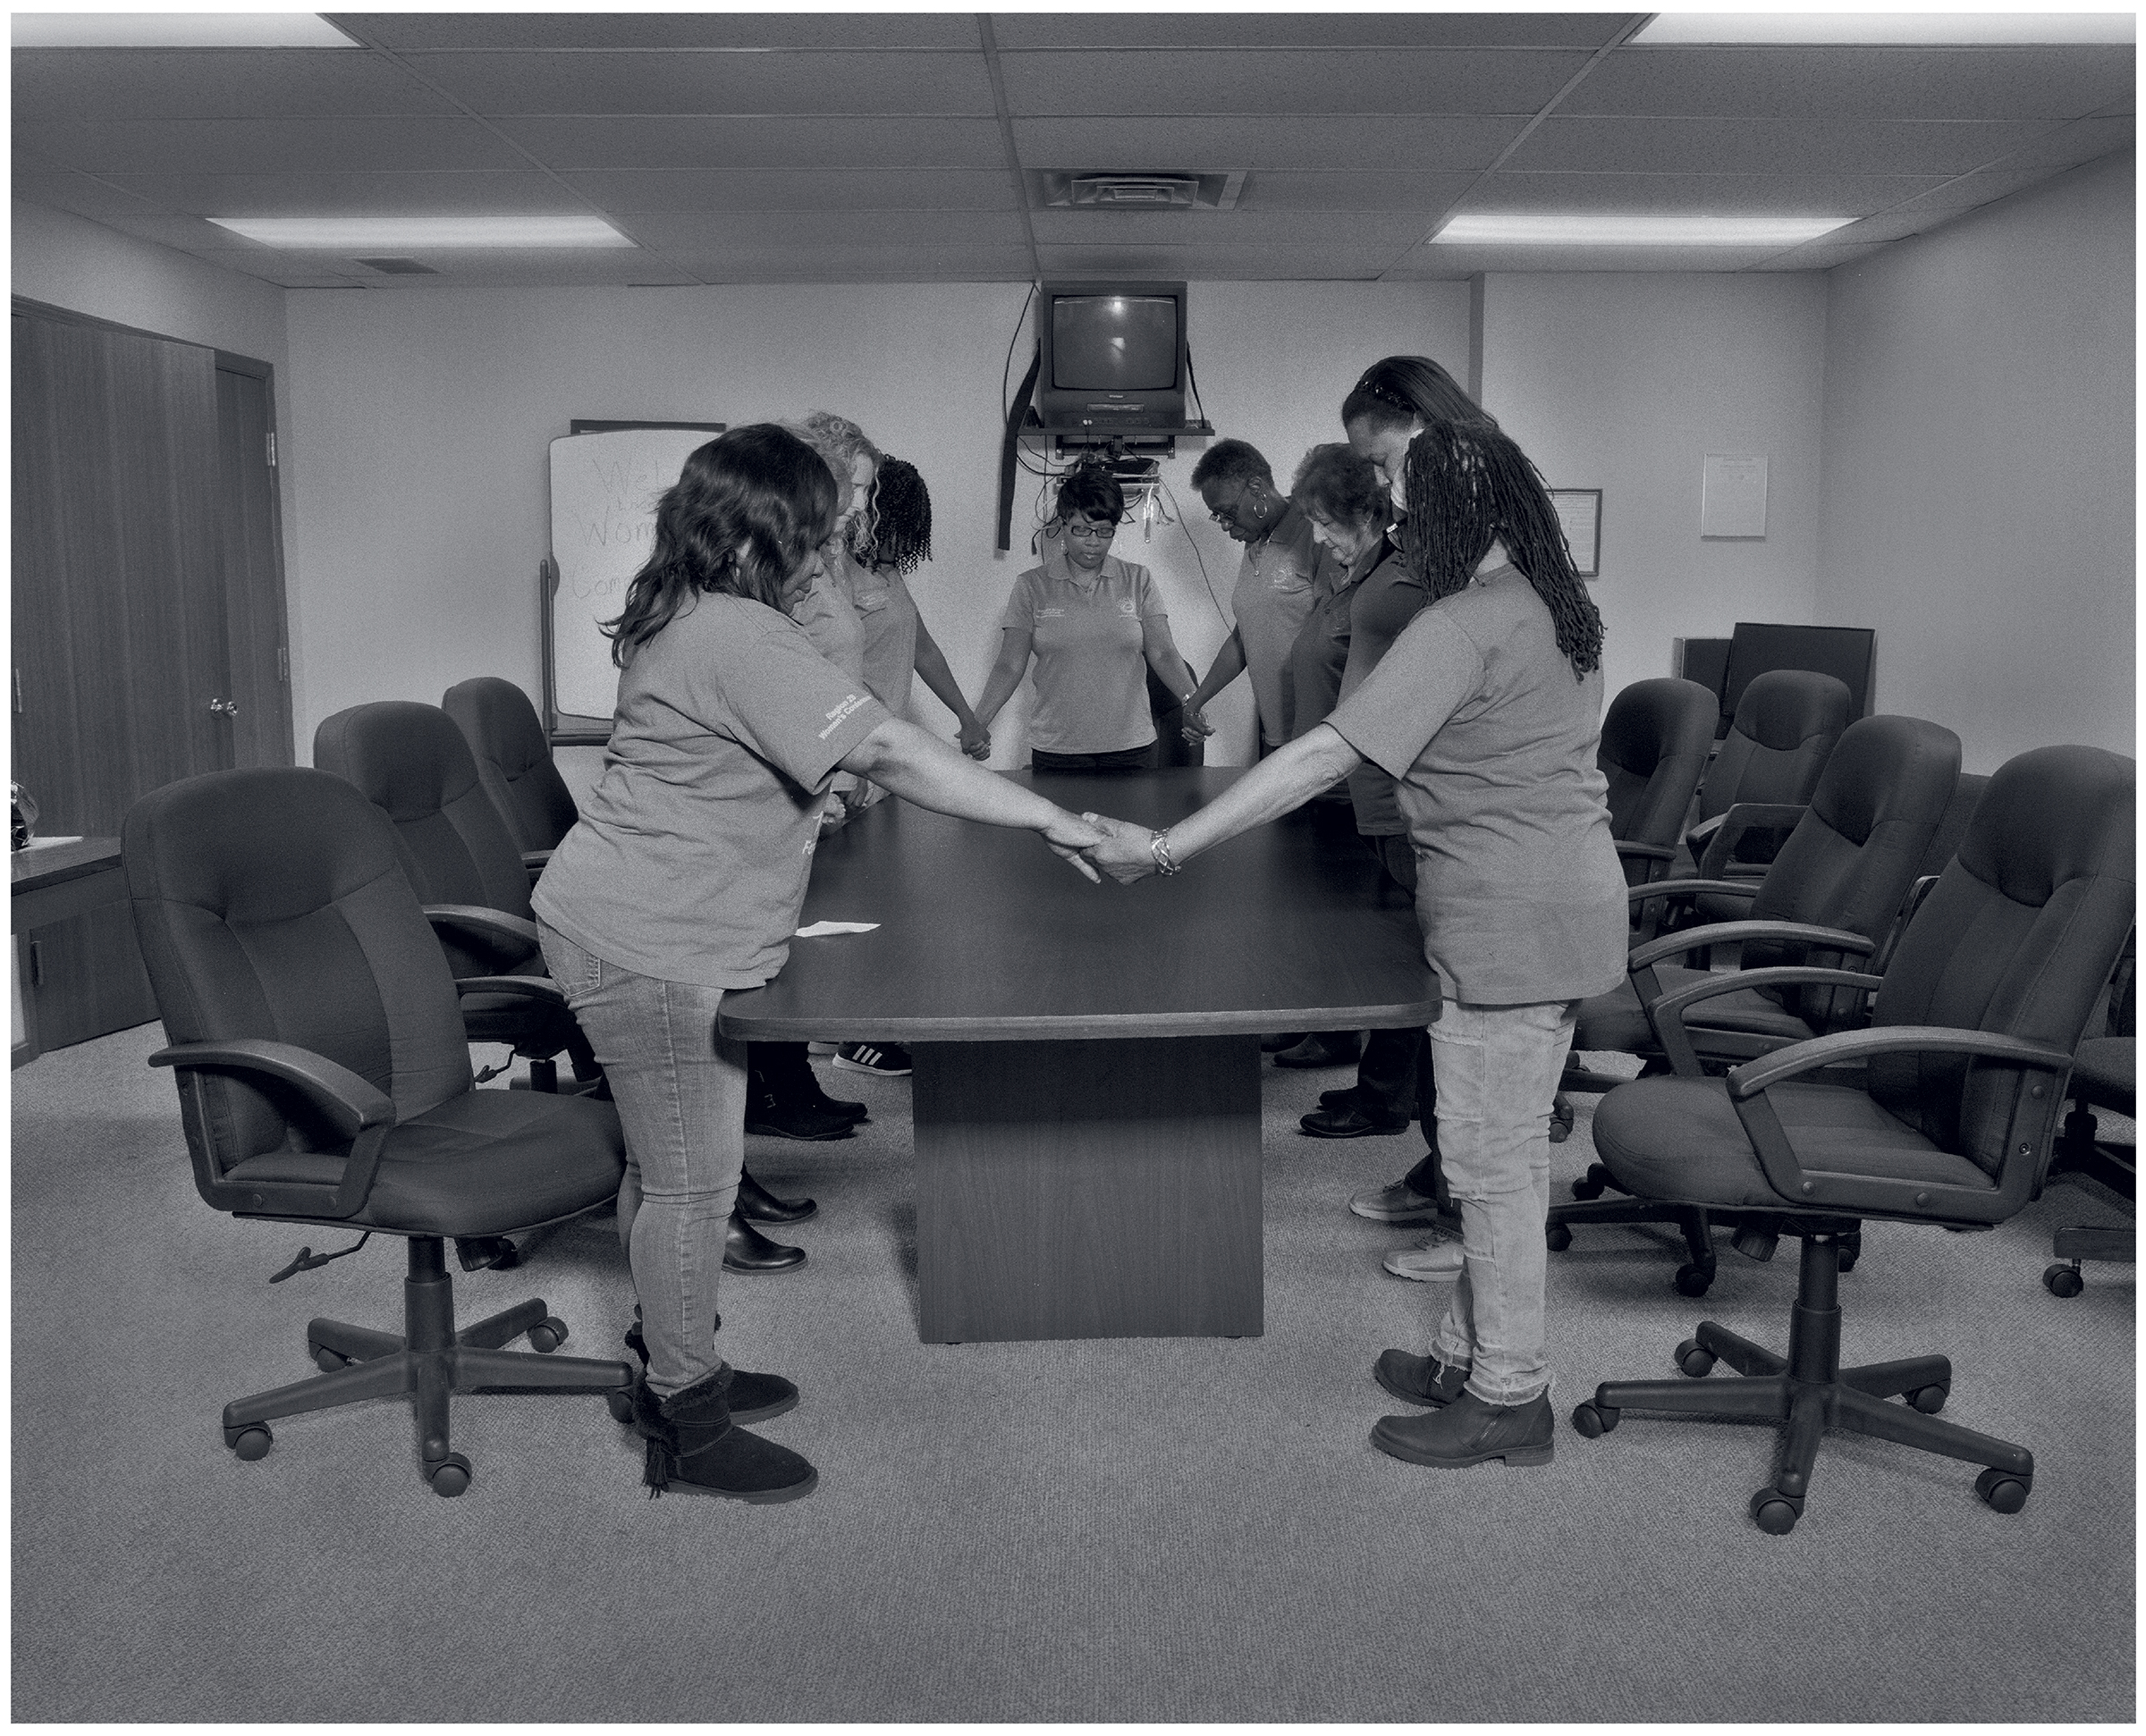 Women's Committee final gathering inside their conference room at UAW Local 1112 Reutehr Scandy Alli union hall (left to right, Crystal Carpenter, Linda Hash, Trisha Brown, RaNeal Edwards, Pamela Brown, Marilyn Moore, Mary Ola Stemple, Tunisha Bell, and Frances Turnage), Lordstown, OH, 2019 (LaToya Ruby Frazier—The Renaissance Society, University of Chicago)